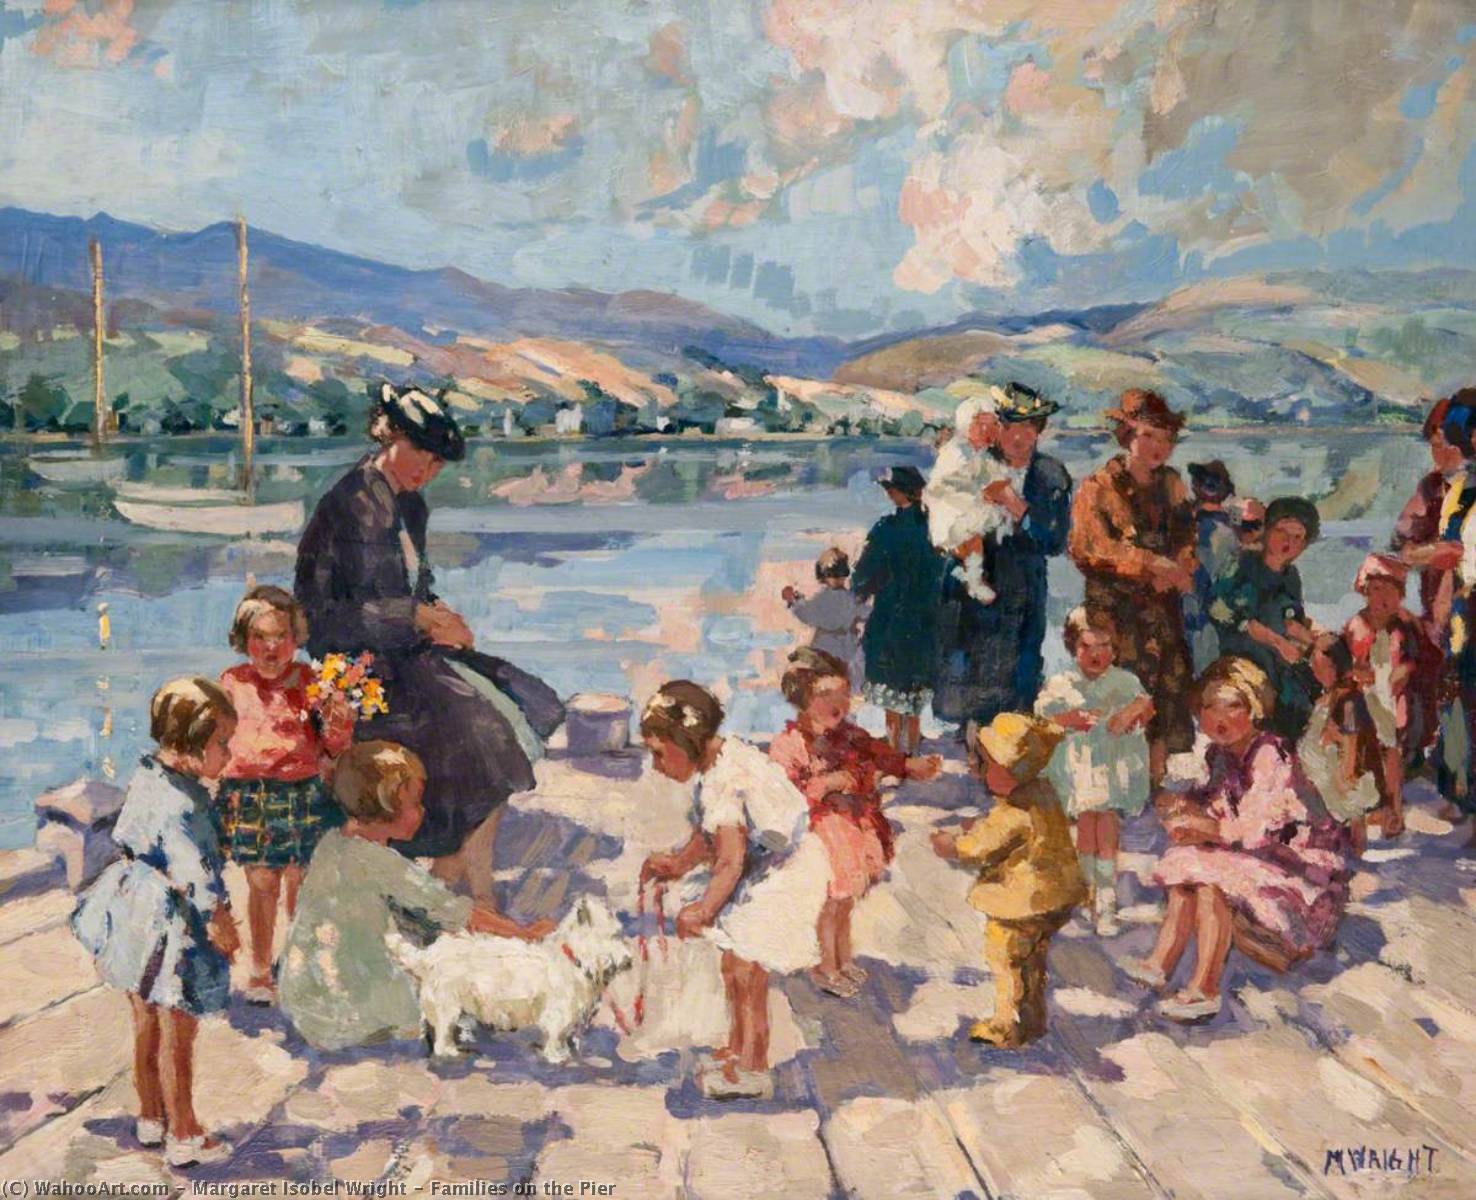 Families on the Pier by Margaret Isobel Wright Margaret Isobel Wright | ArtsDot.com